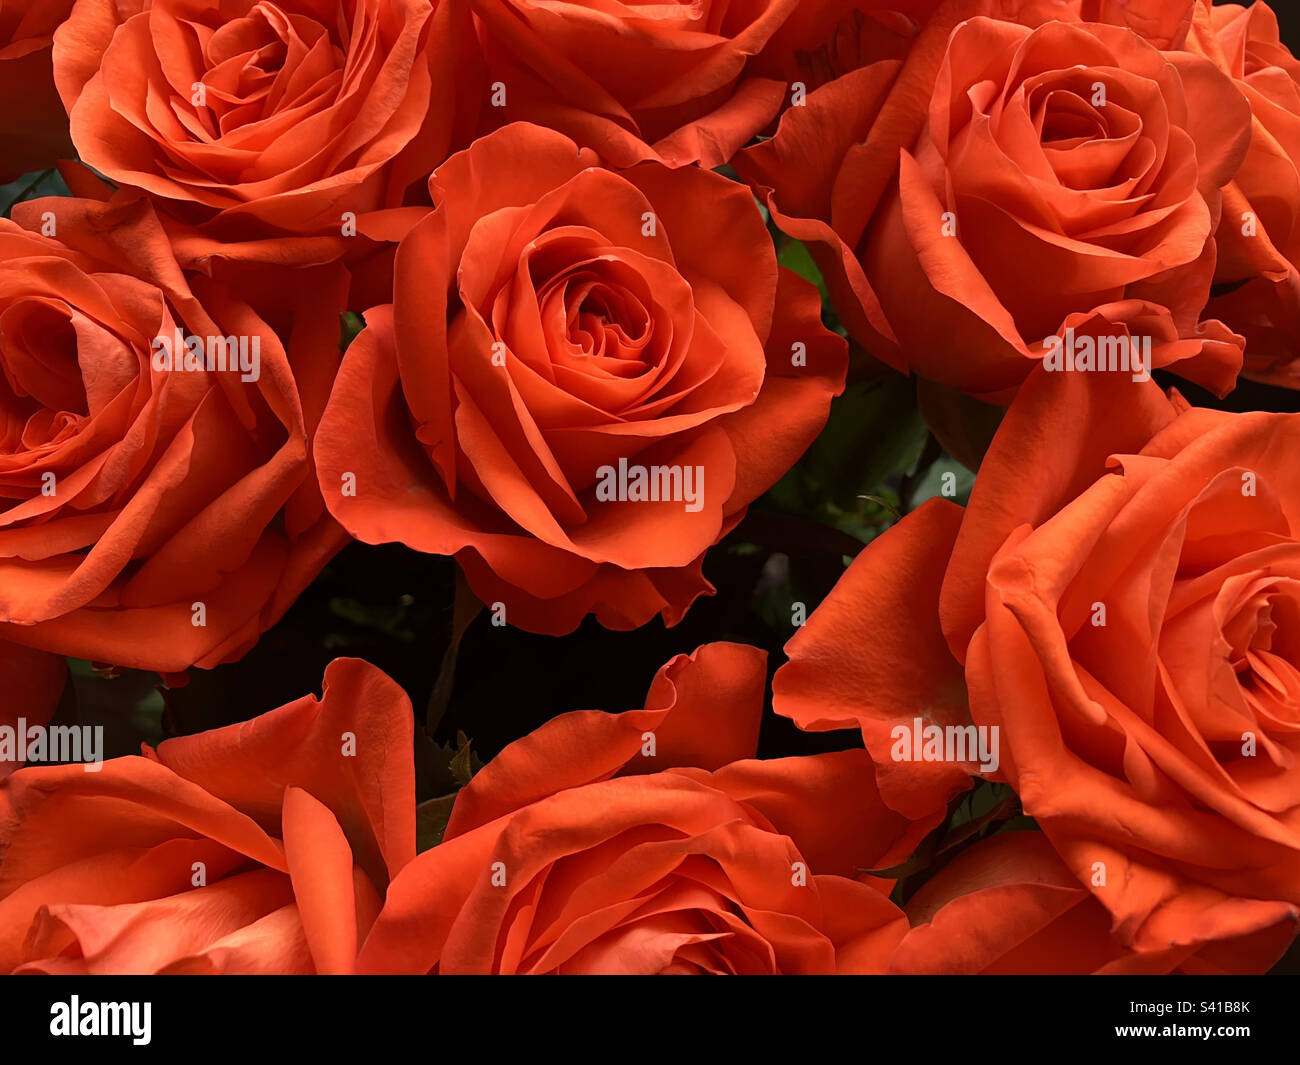 Bouquet of beautiful bright and vibrant orange roses Stock Photo